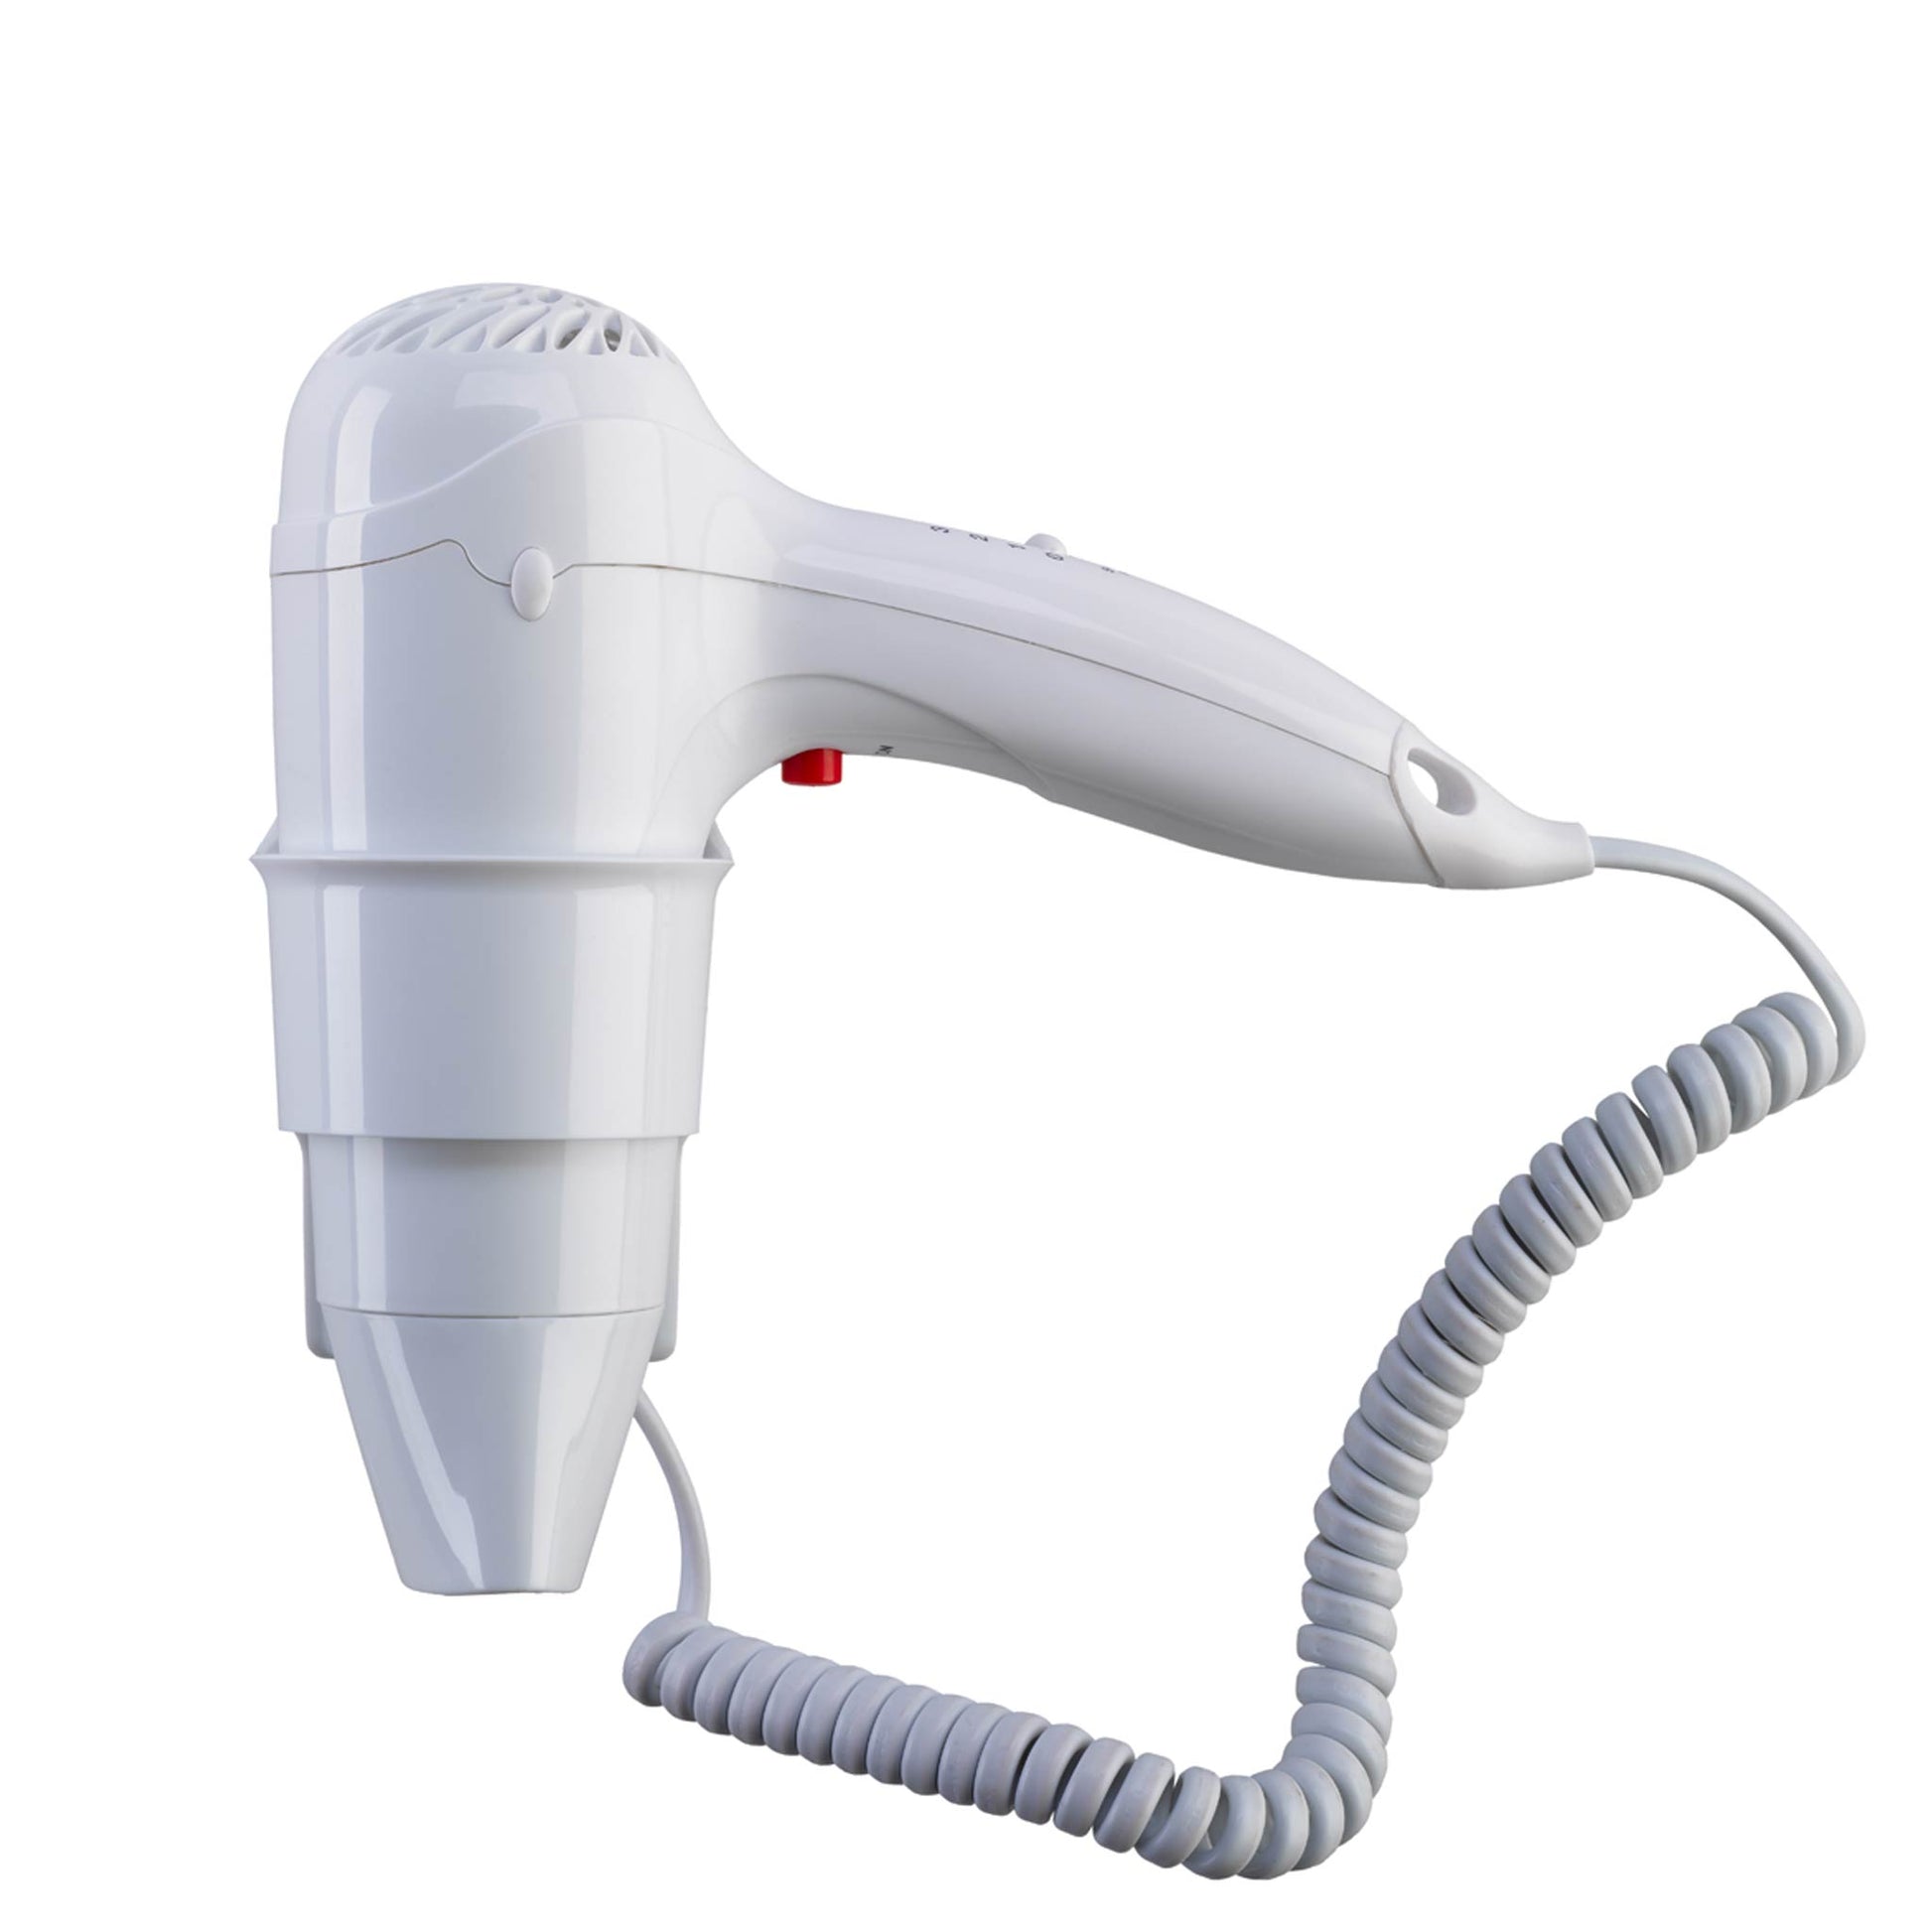 Northmace Classic hairdryer in white with holder and coiled cable